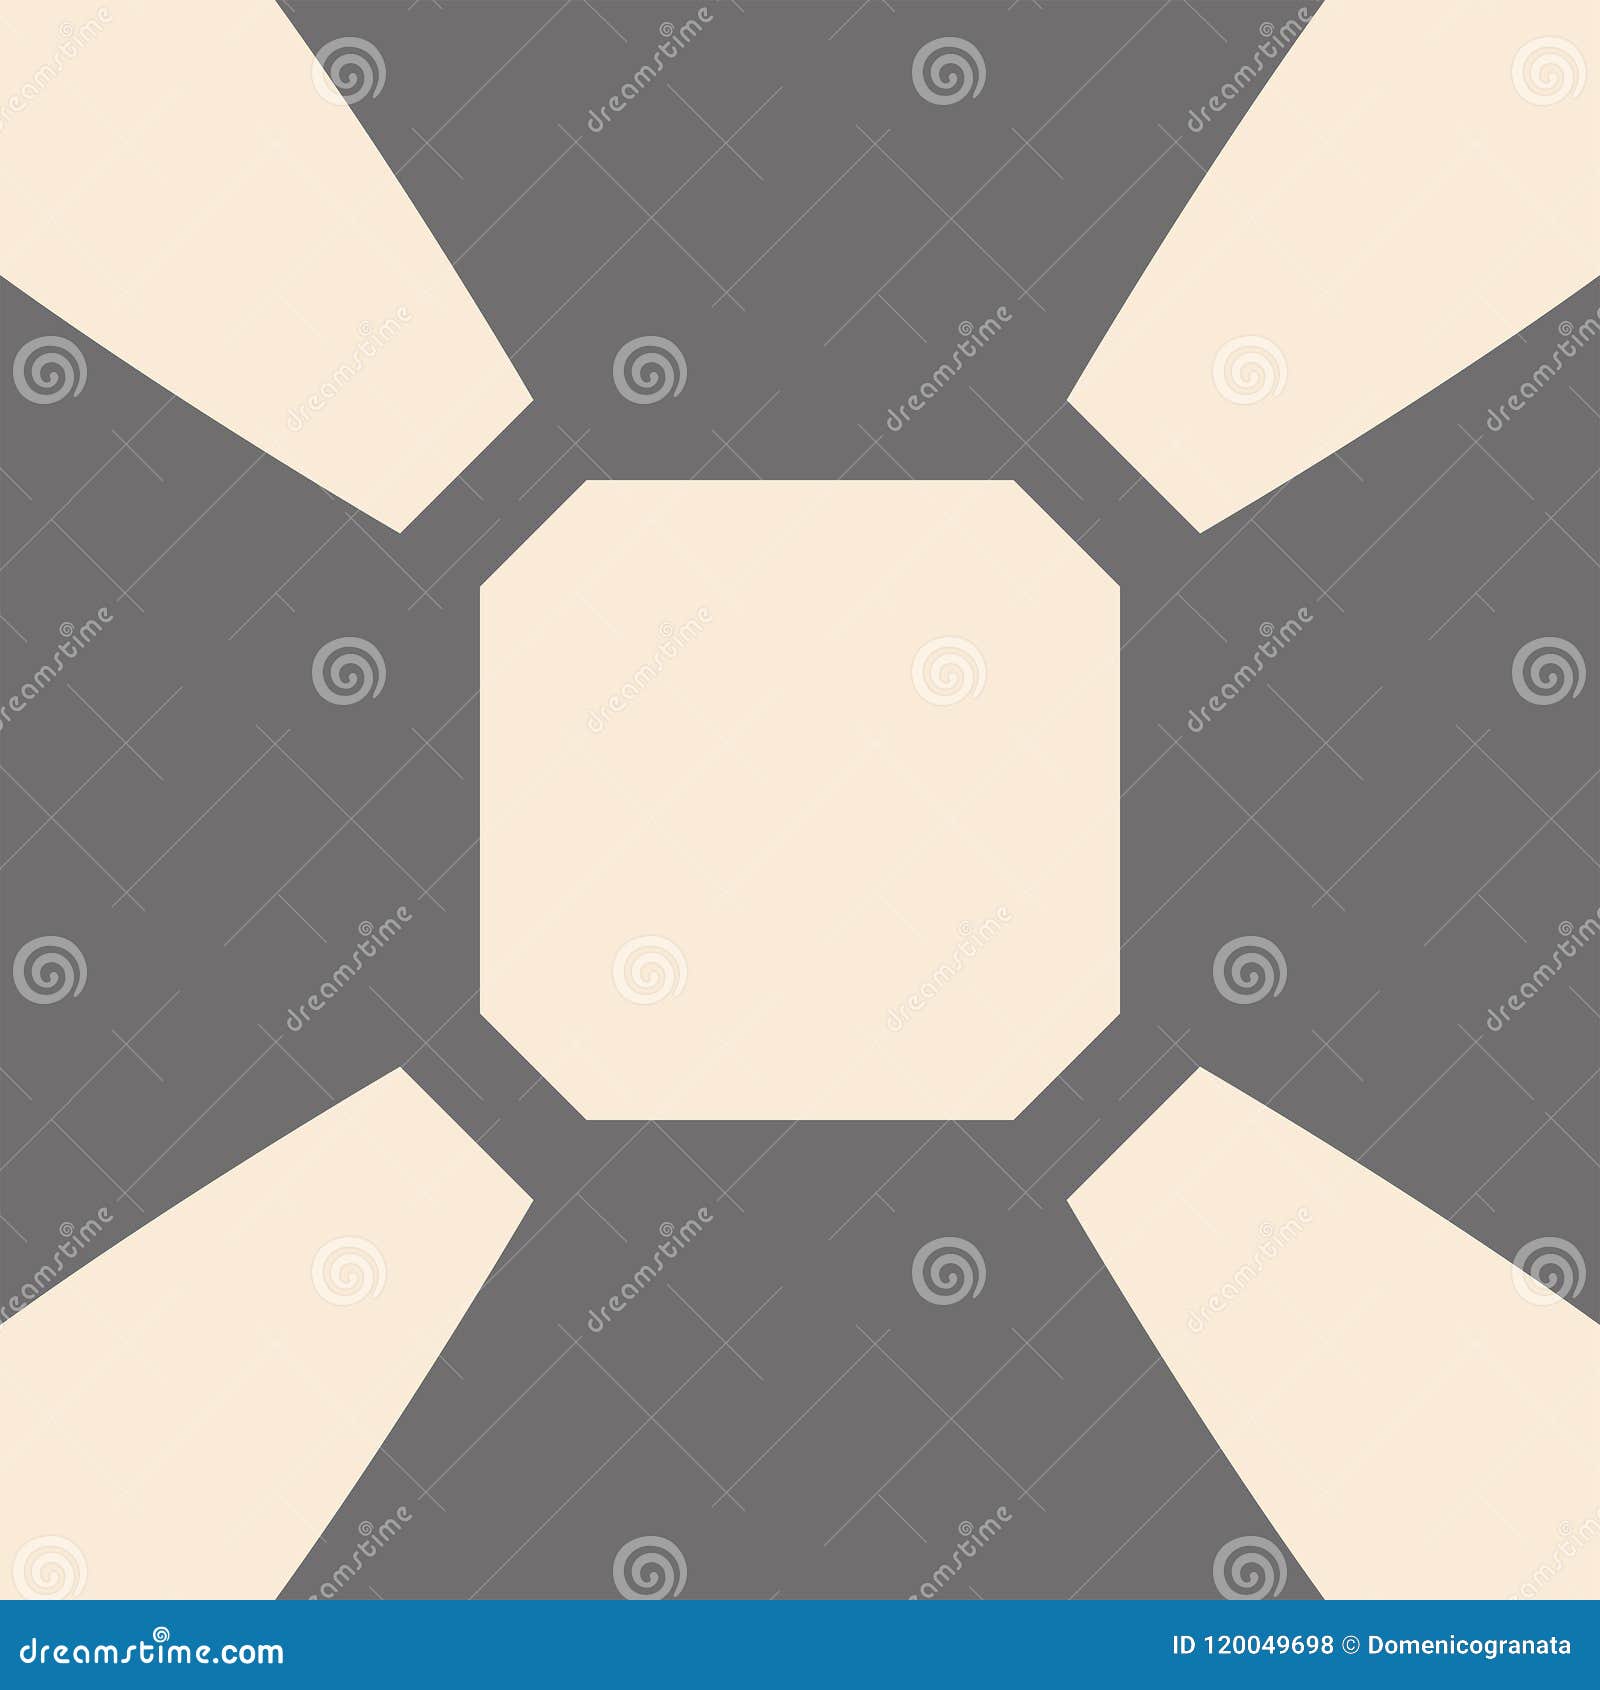 geometric and minimal pattern for a tile